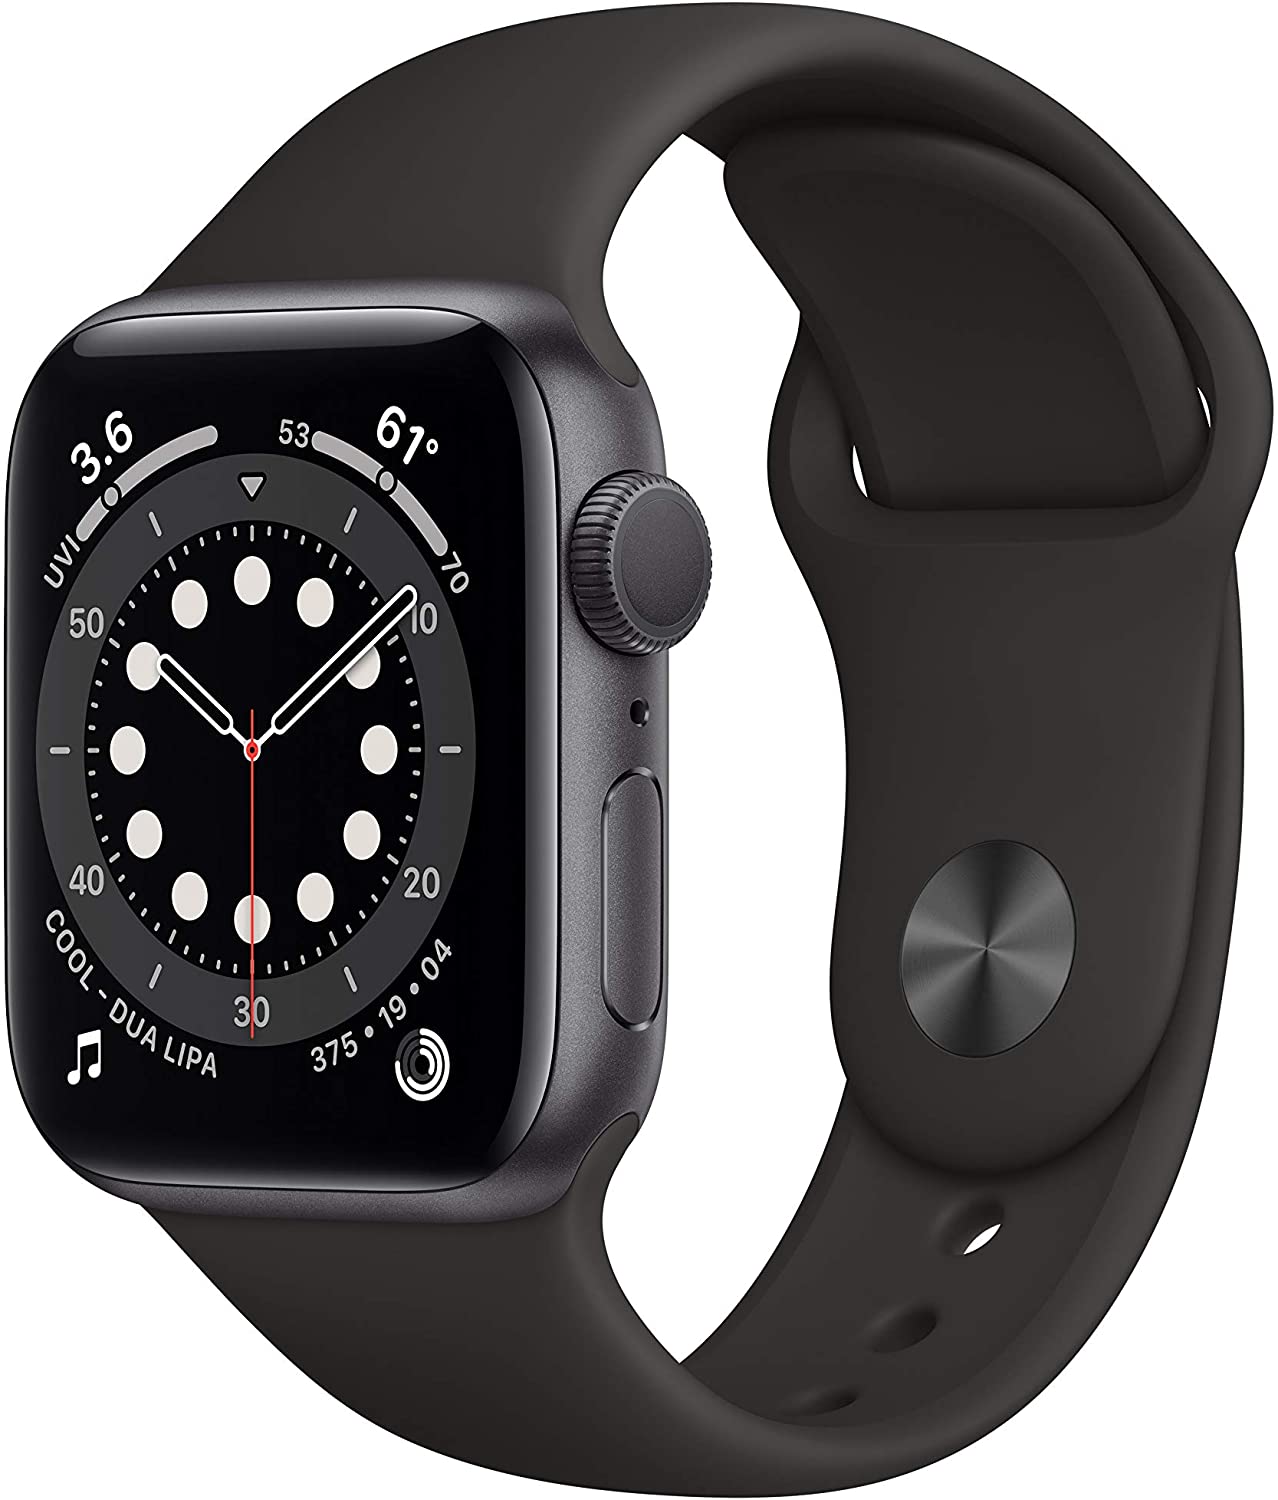 New Apple Watch Series 6 (GPS, 40mm) - Space Gray Aluminum Case with Black Sport Band 苹果手表6代 40mm 黑色